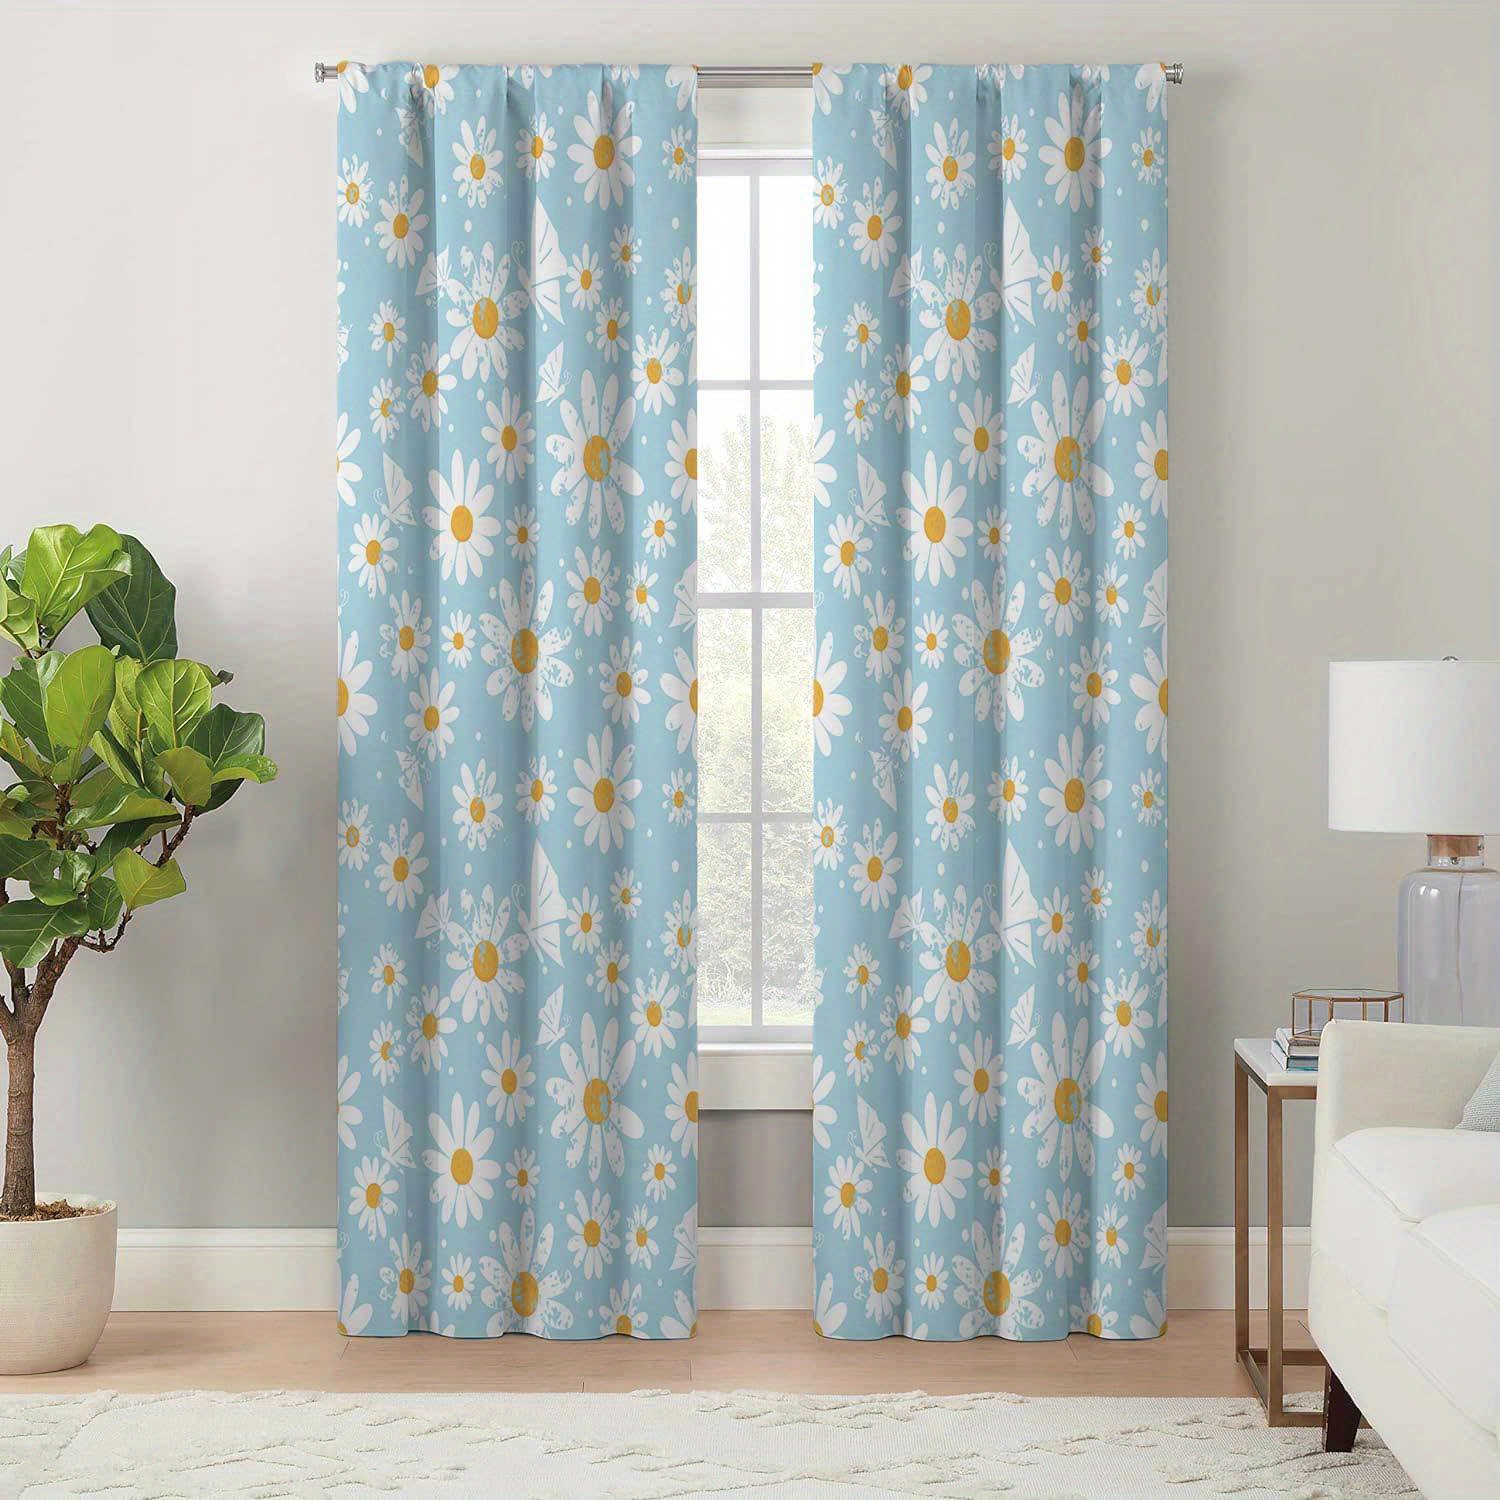 

Boho Chic Daisy Print Jacquard Polyester Curtains With Tie Back - Pastoral Theme, Easy Care Machine Washable Drapes For Living Room - Elegant Seasonal Charm, Durable And Easy To Hang